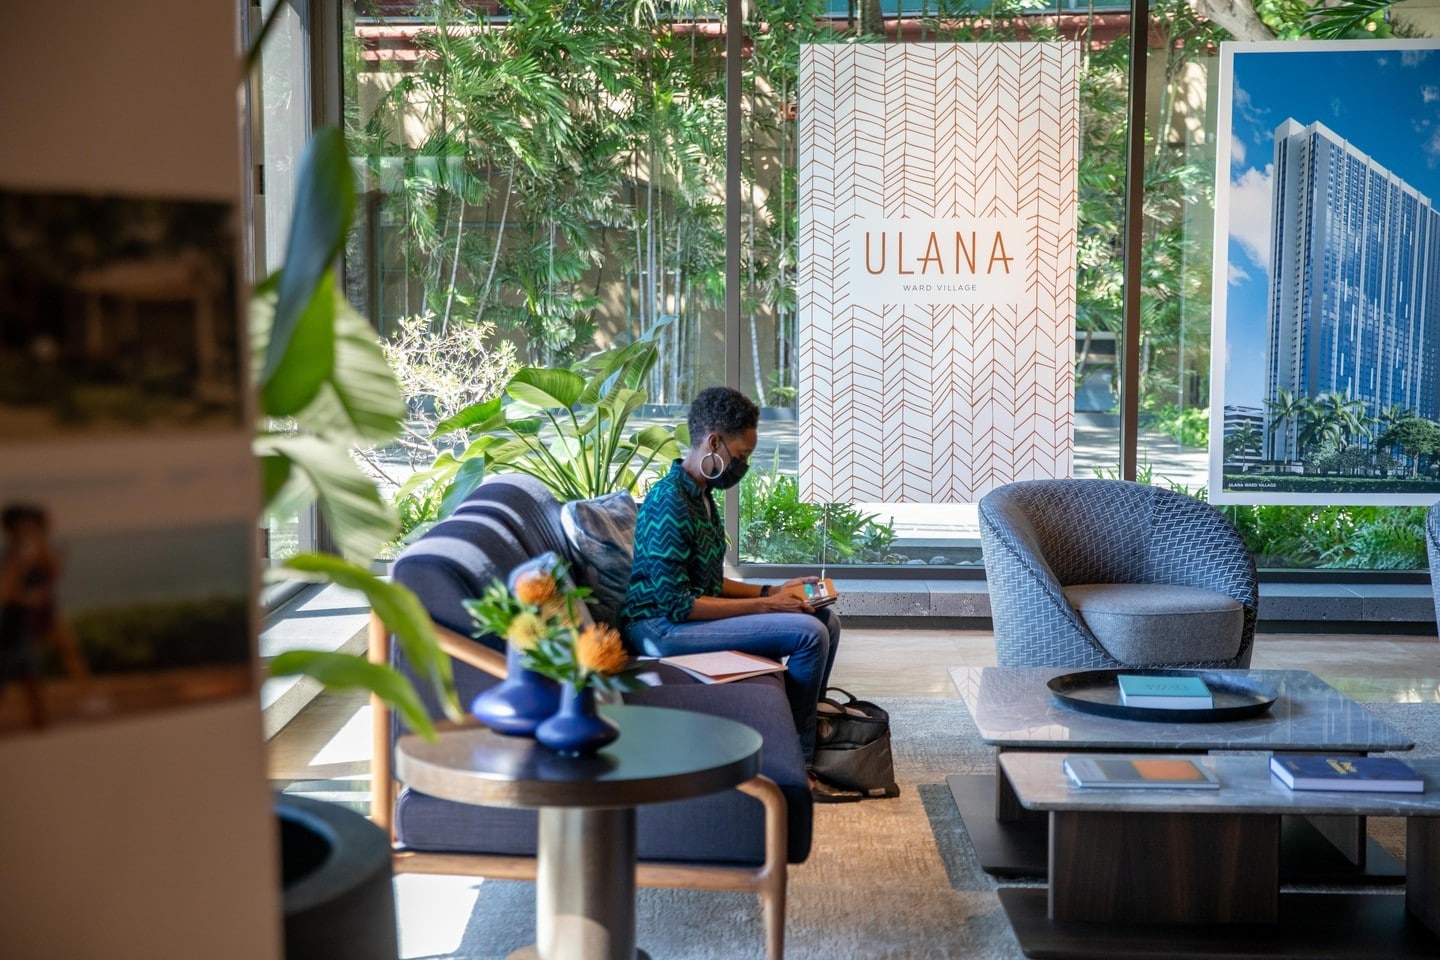 Tomorrow is the last day to submit your Reserved Housing Application for Ulana Ward Village. We’re here to make the application process easy and convenient. The Ulana Sales Gallery will be open to accept your in-person submission from 10am until 11:59pm on February 13. Click the link in bio for all the details!